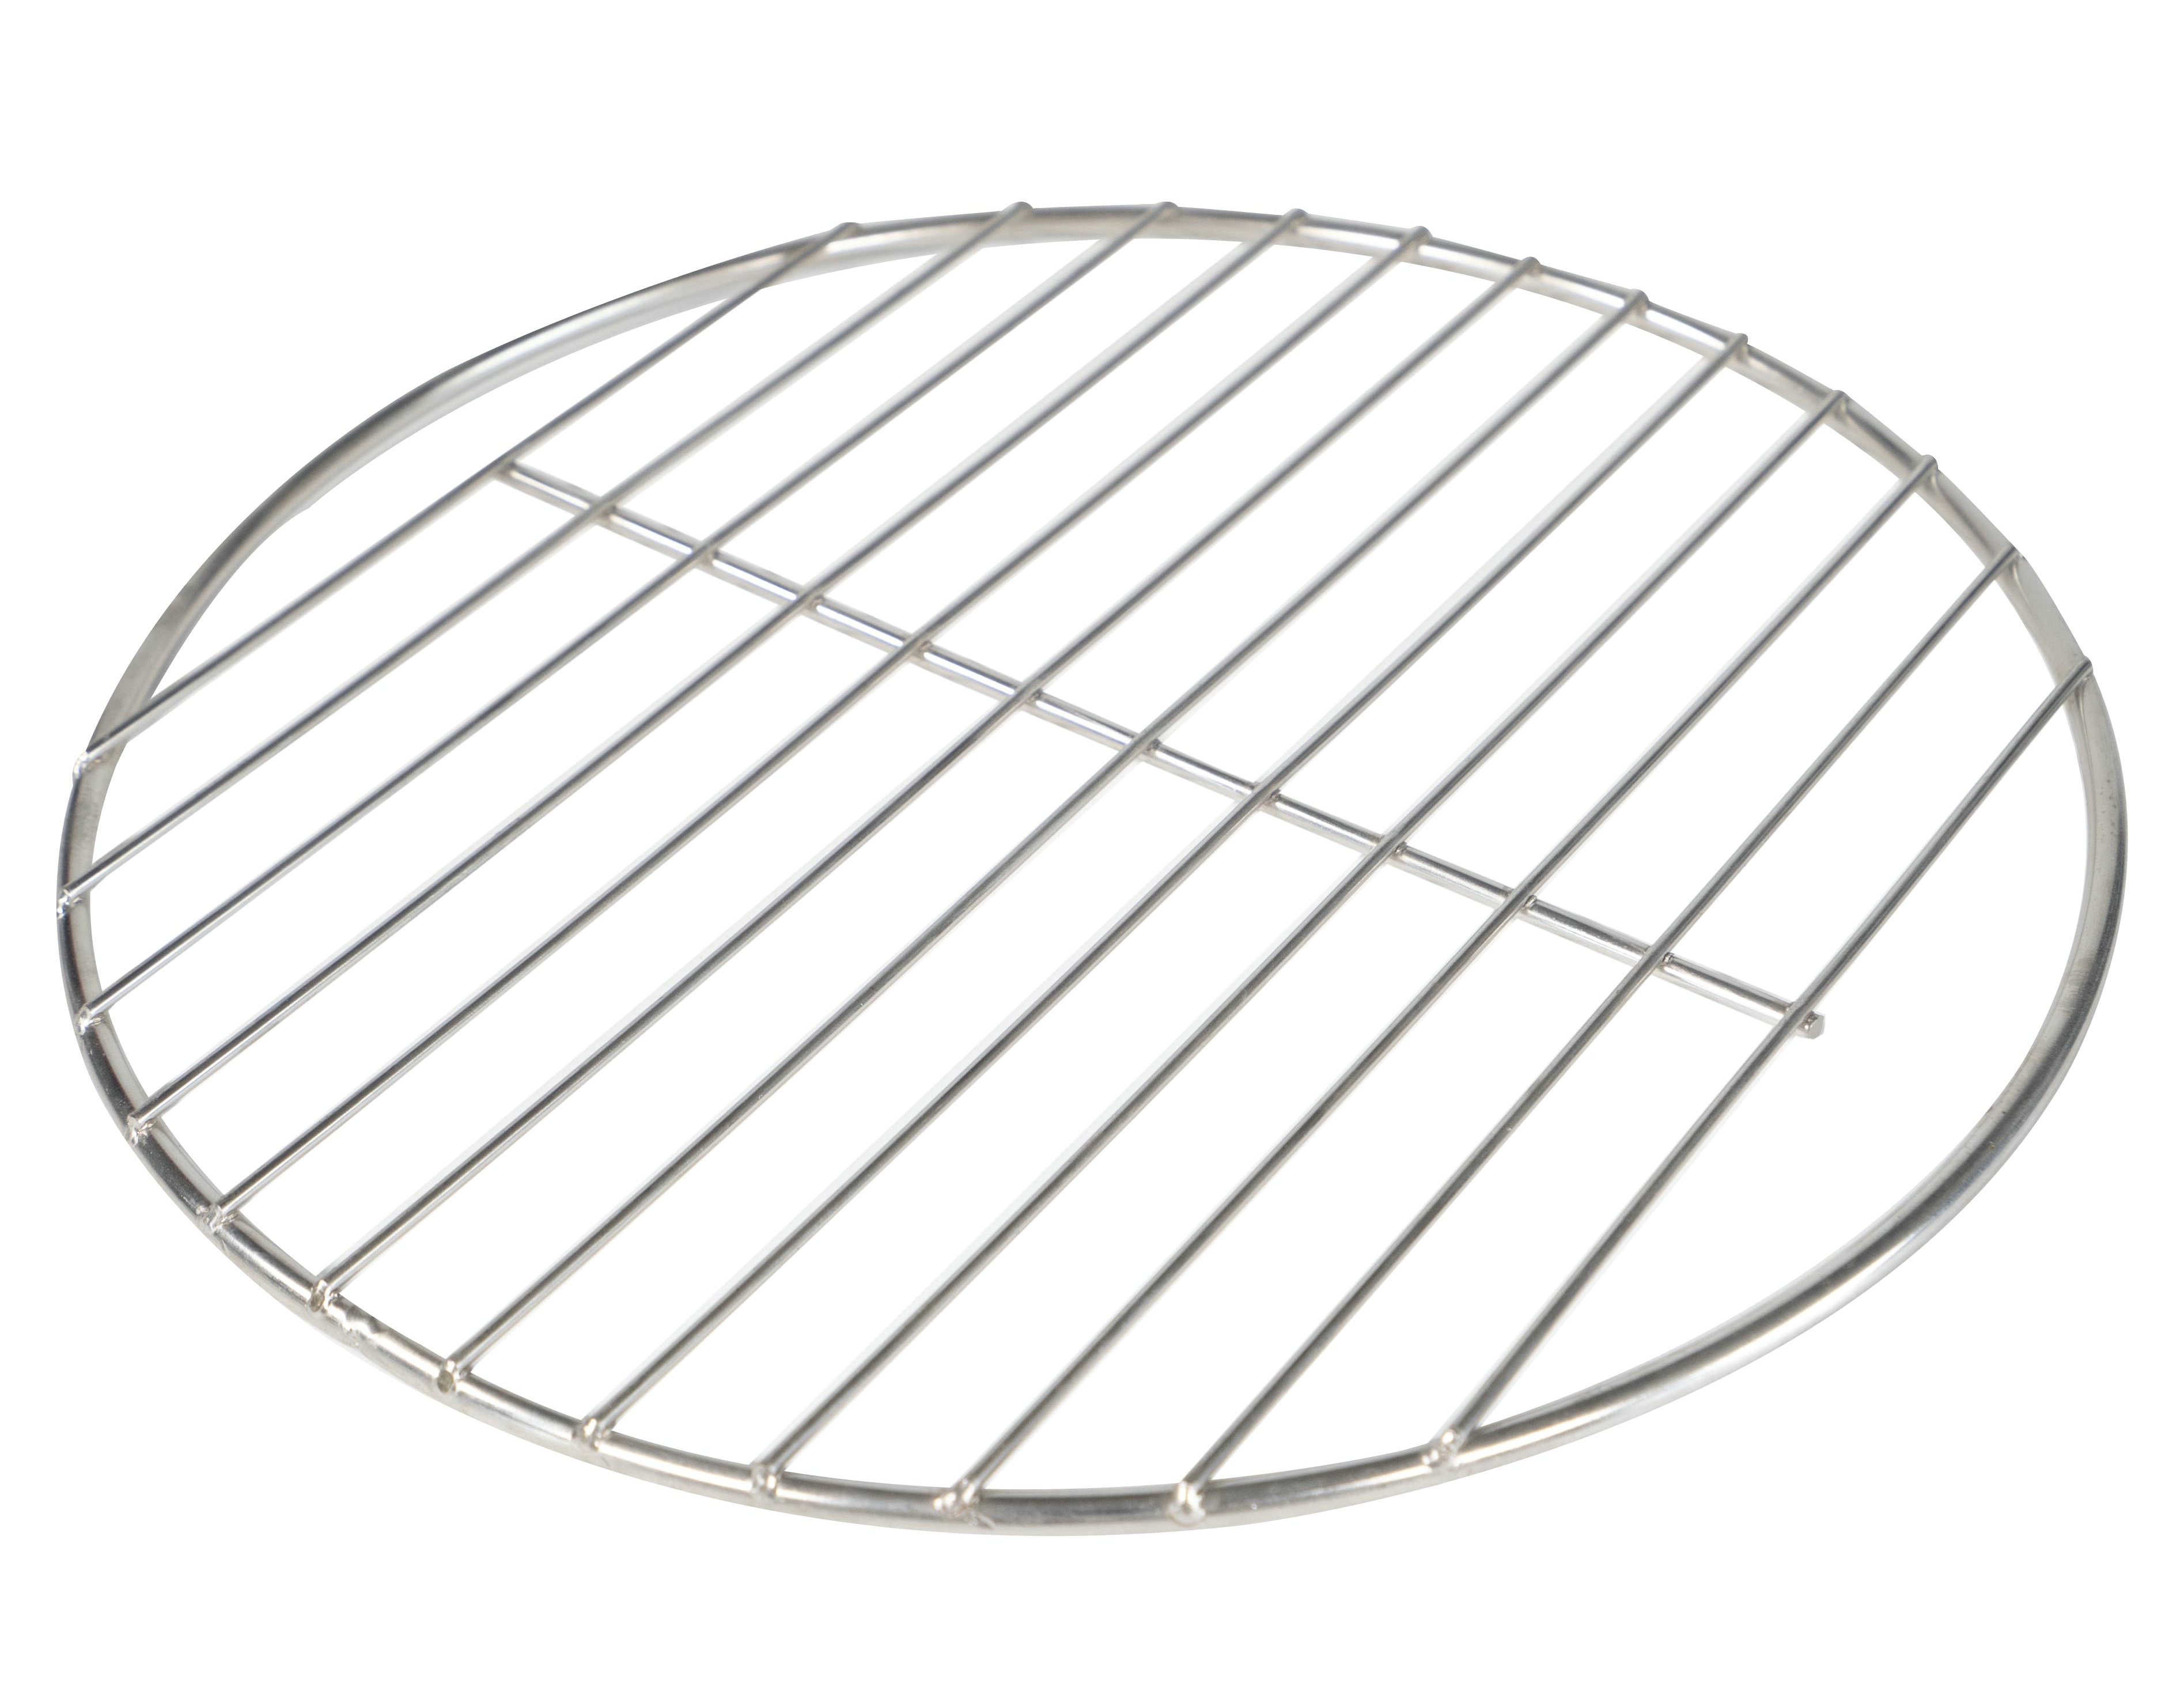 Widely used Stainless steel wire mesh grill